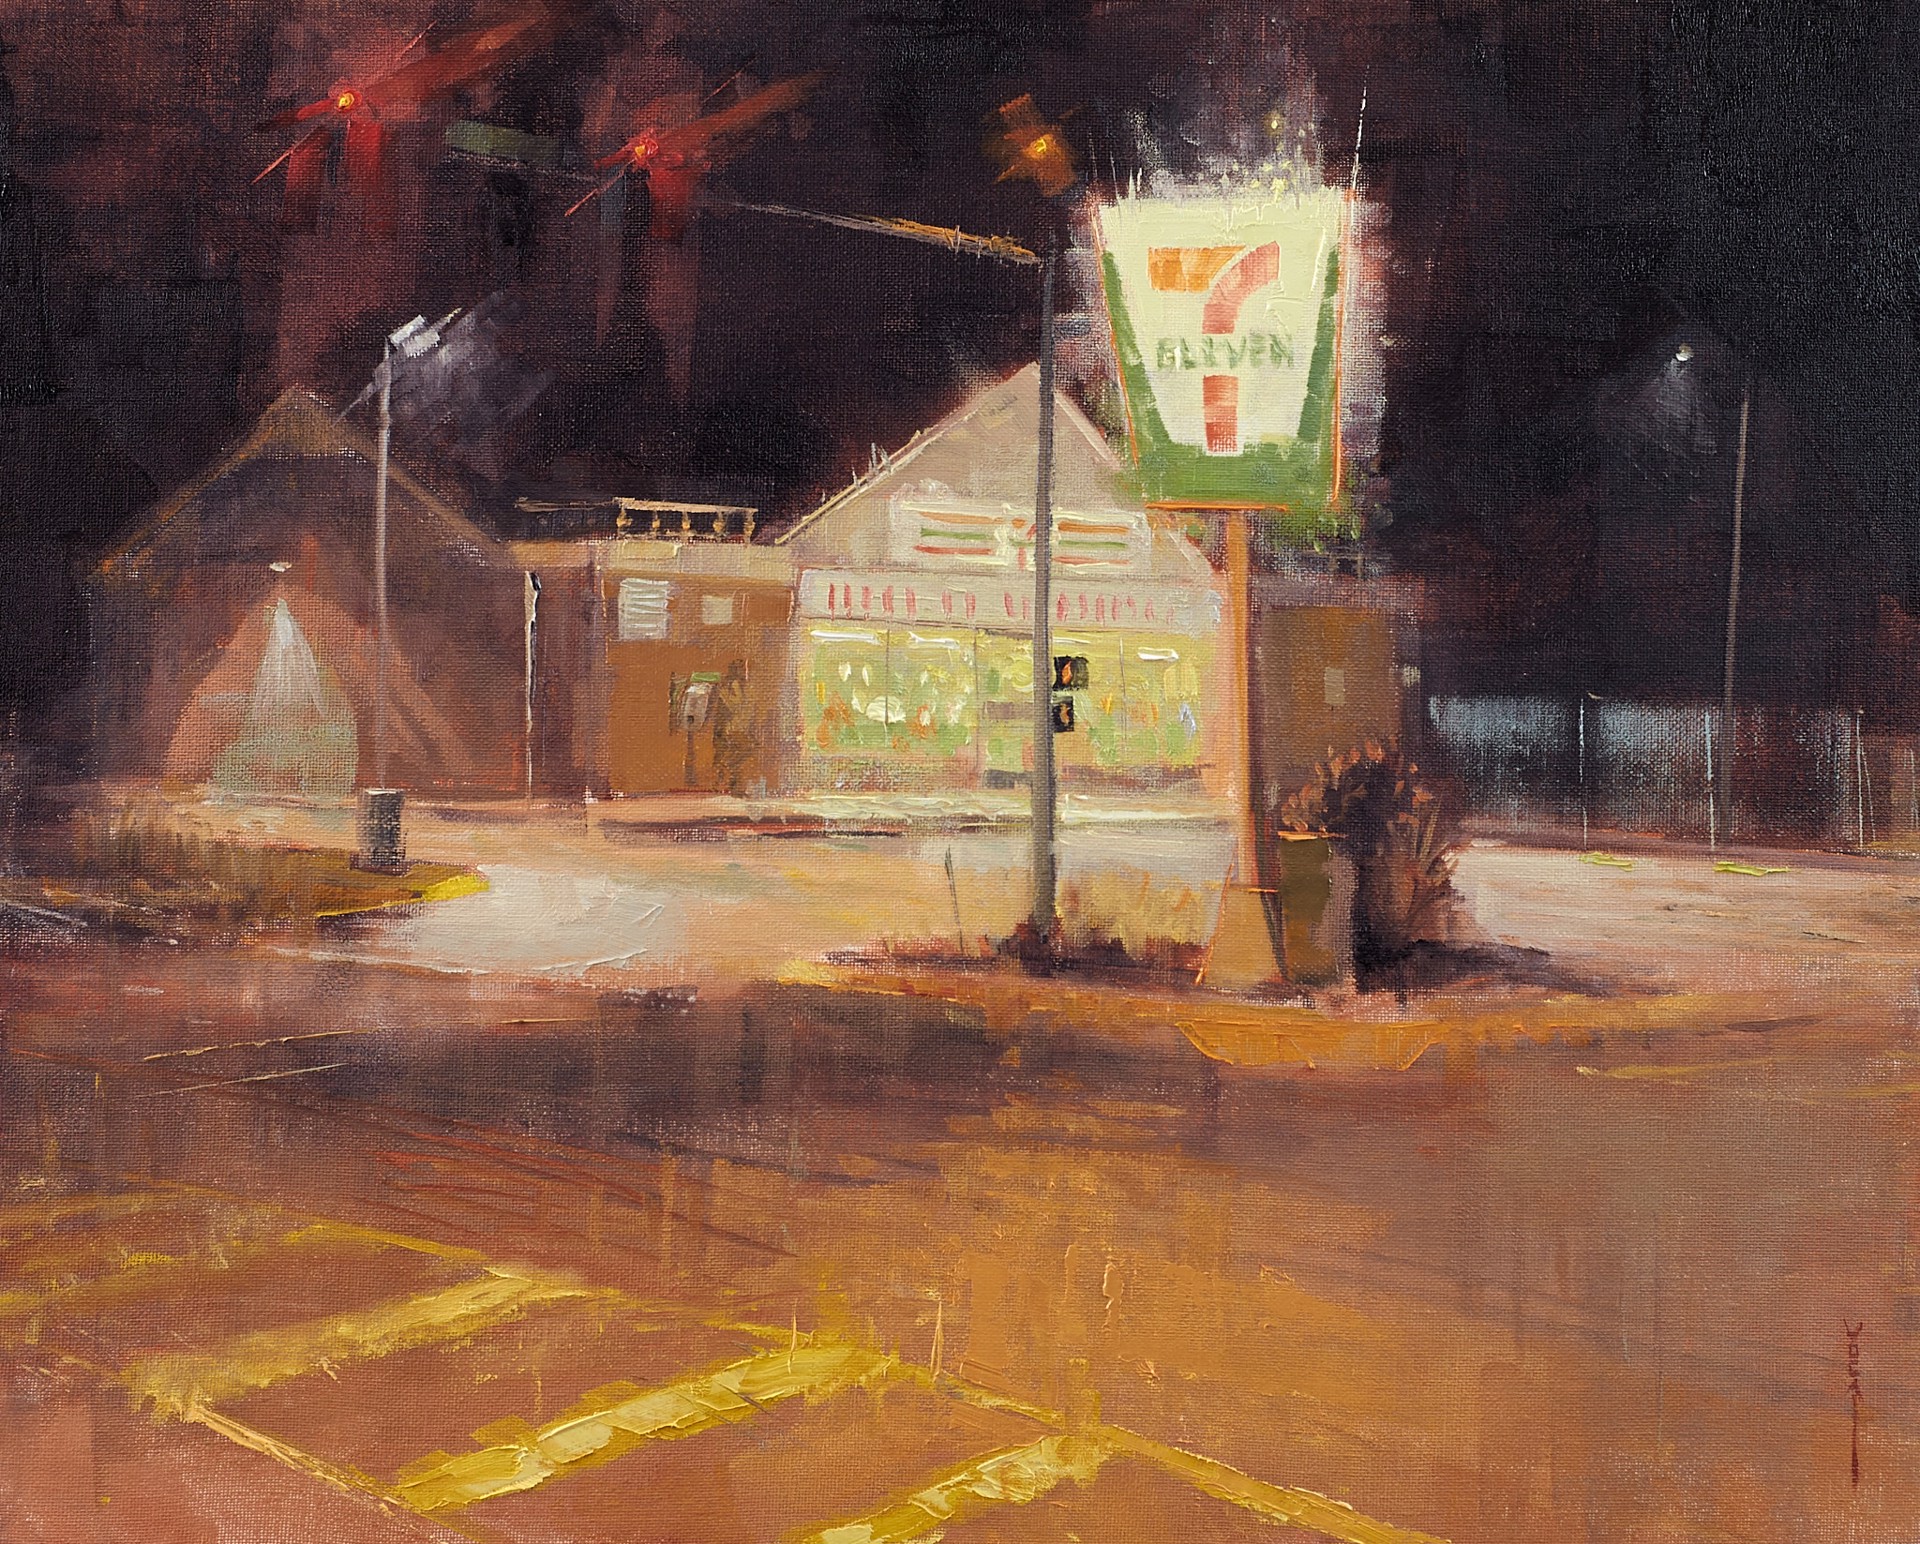 17th at 7-11 by Doug Clarke